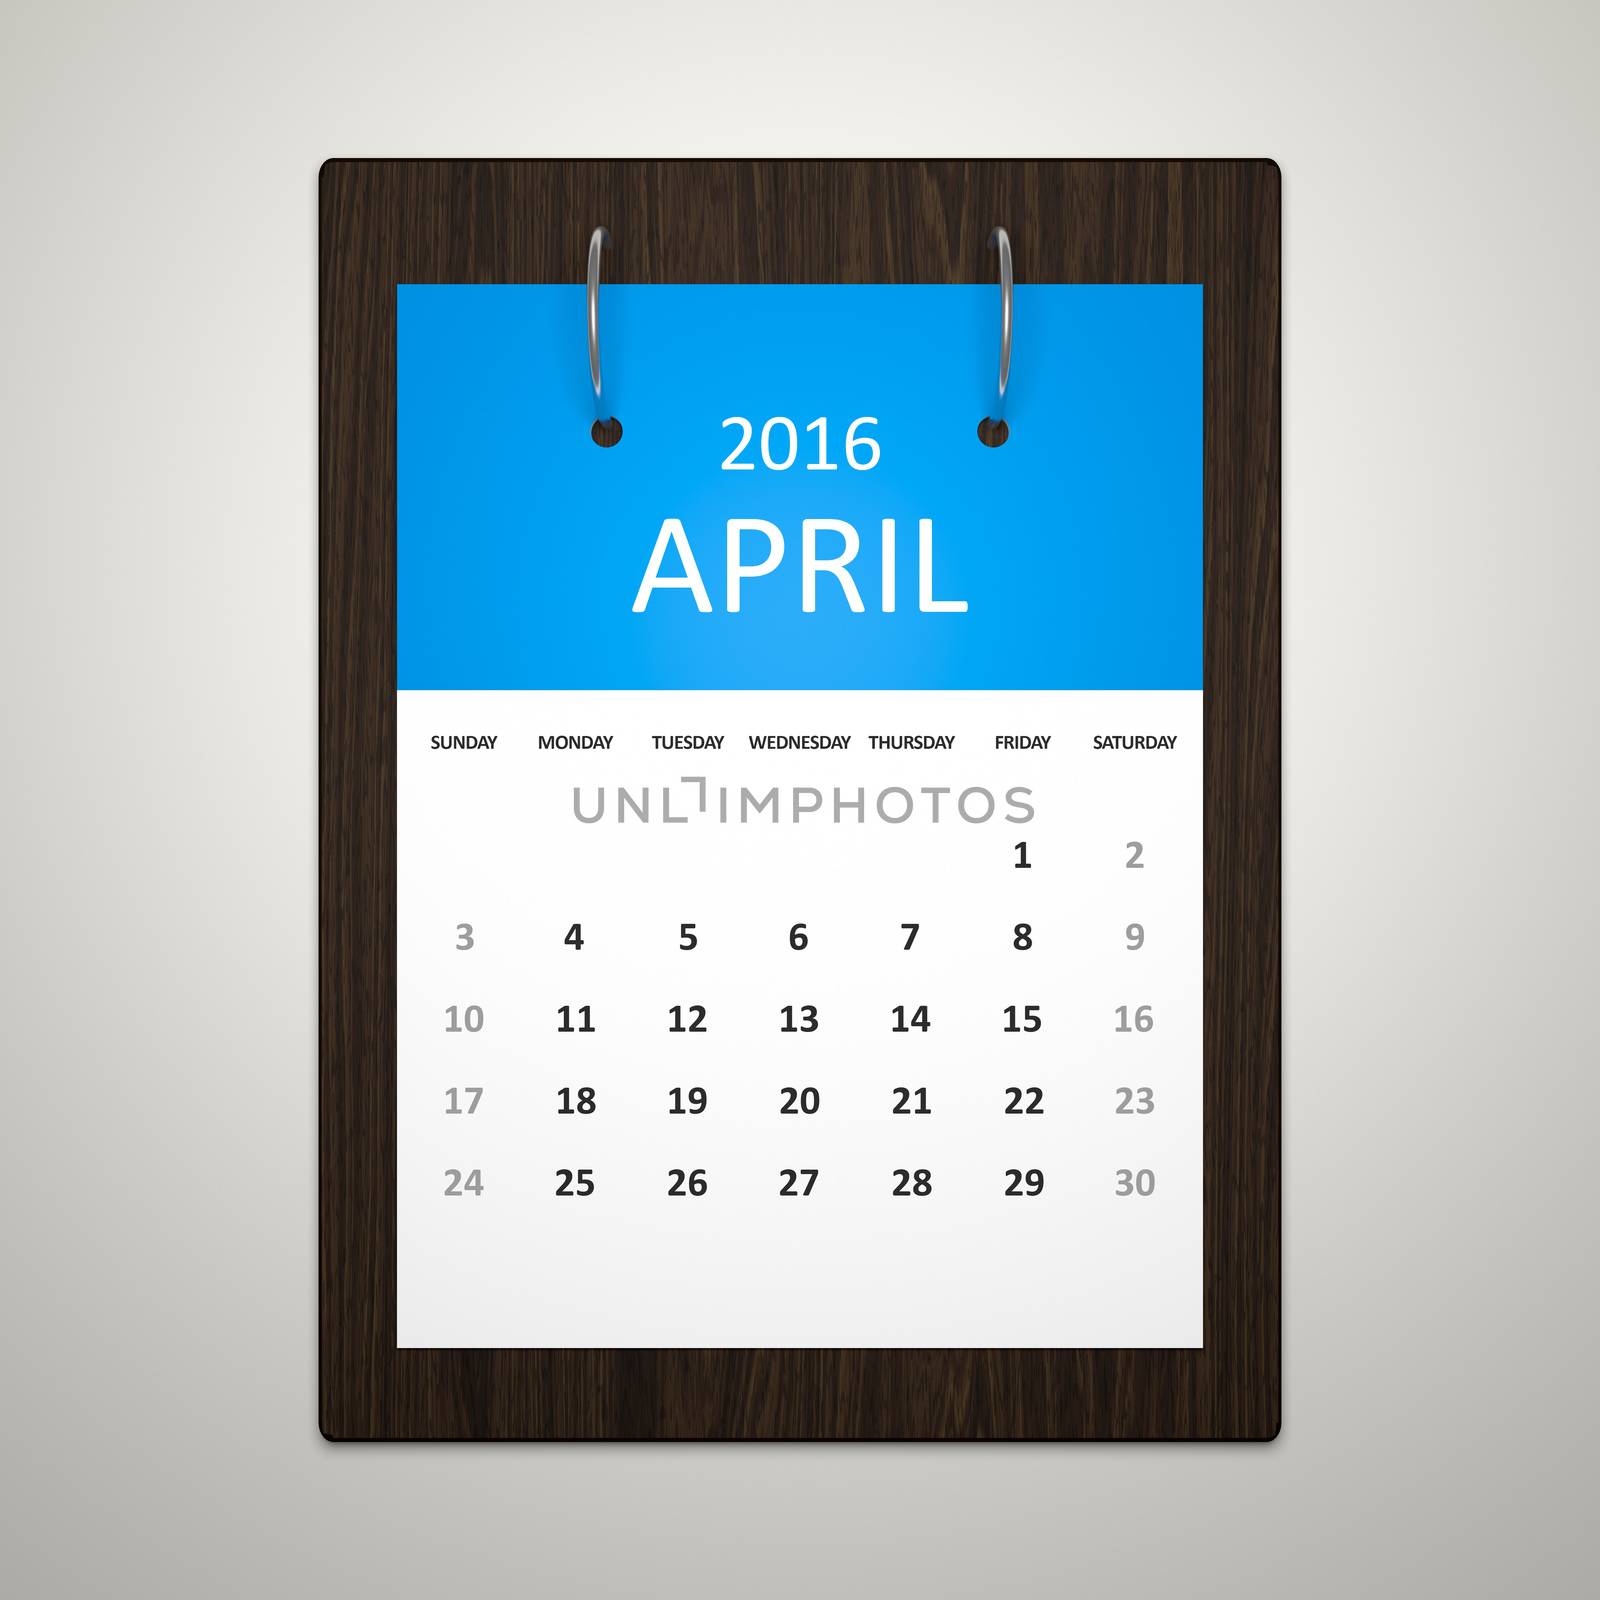 An image of a stylish calendar for event planning 2016 April